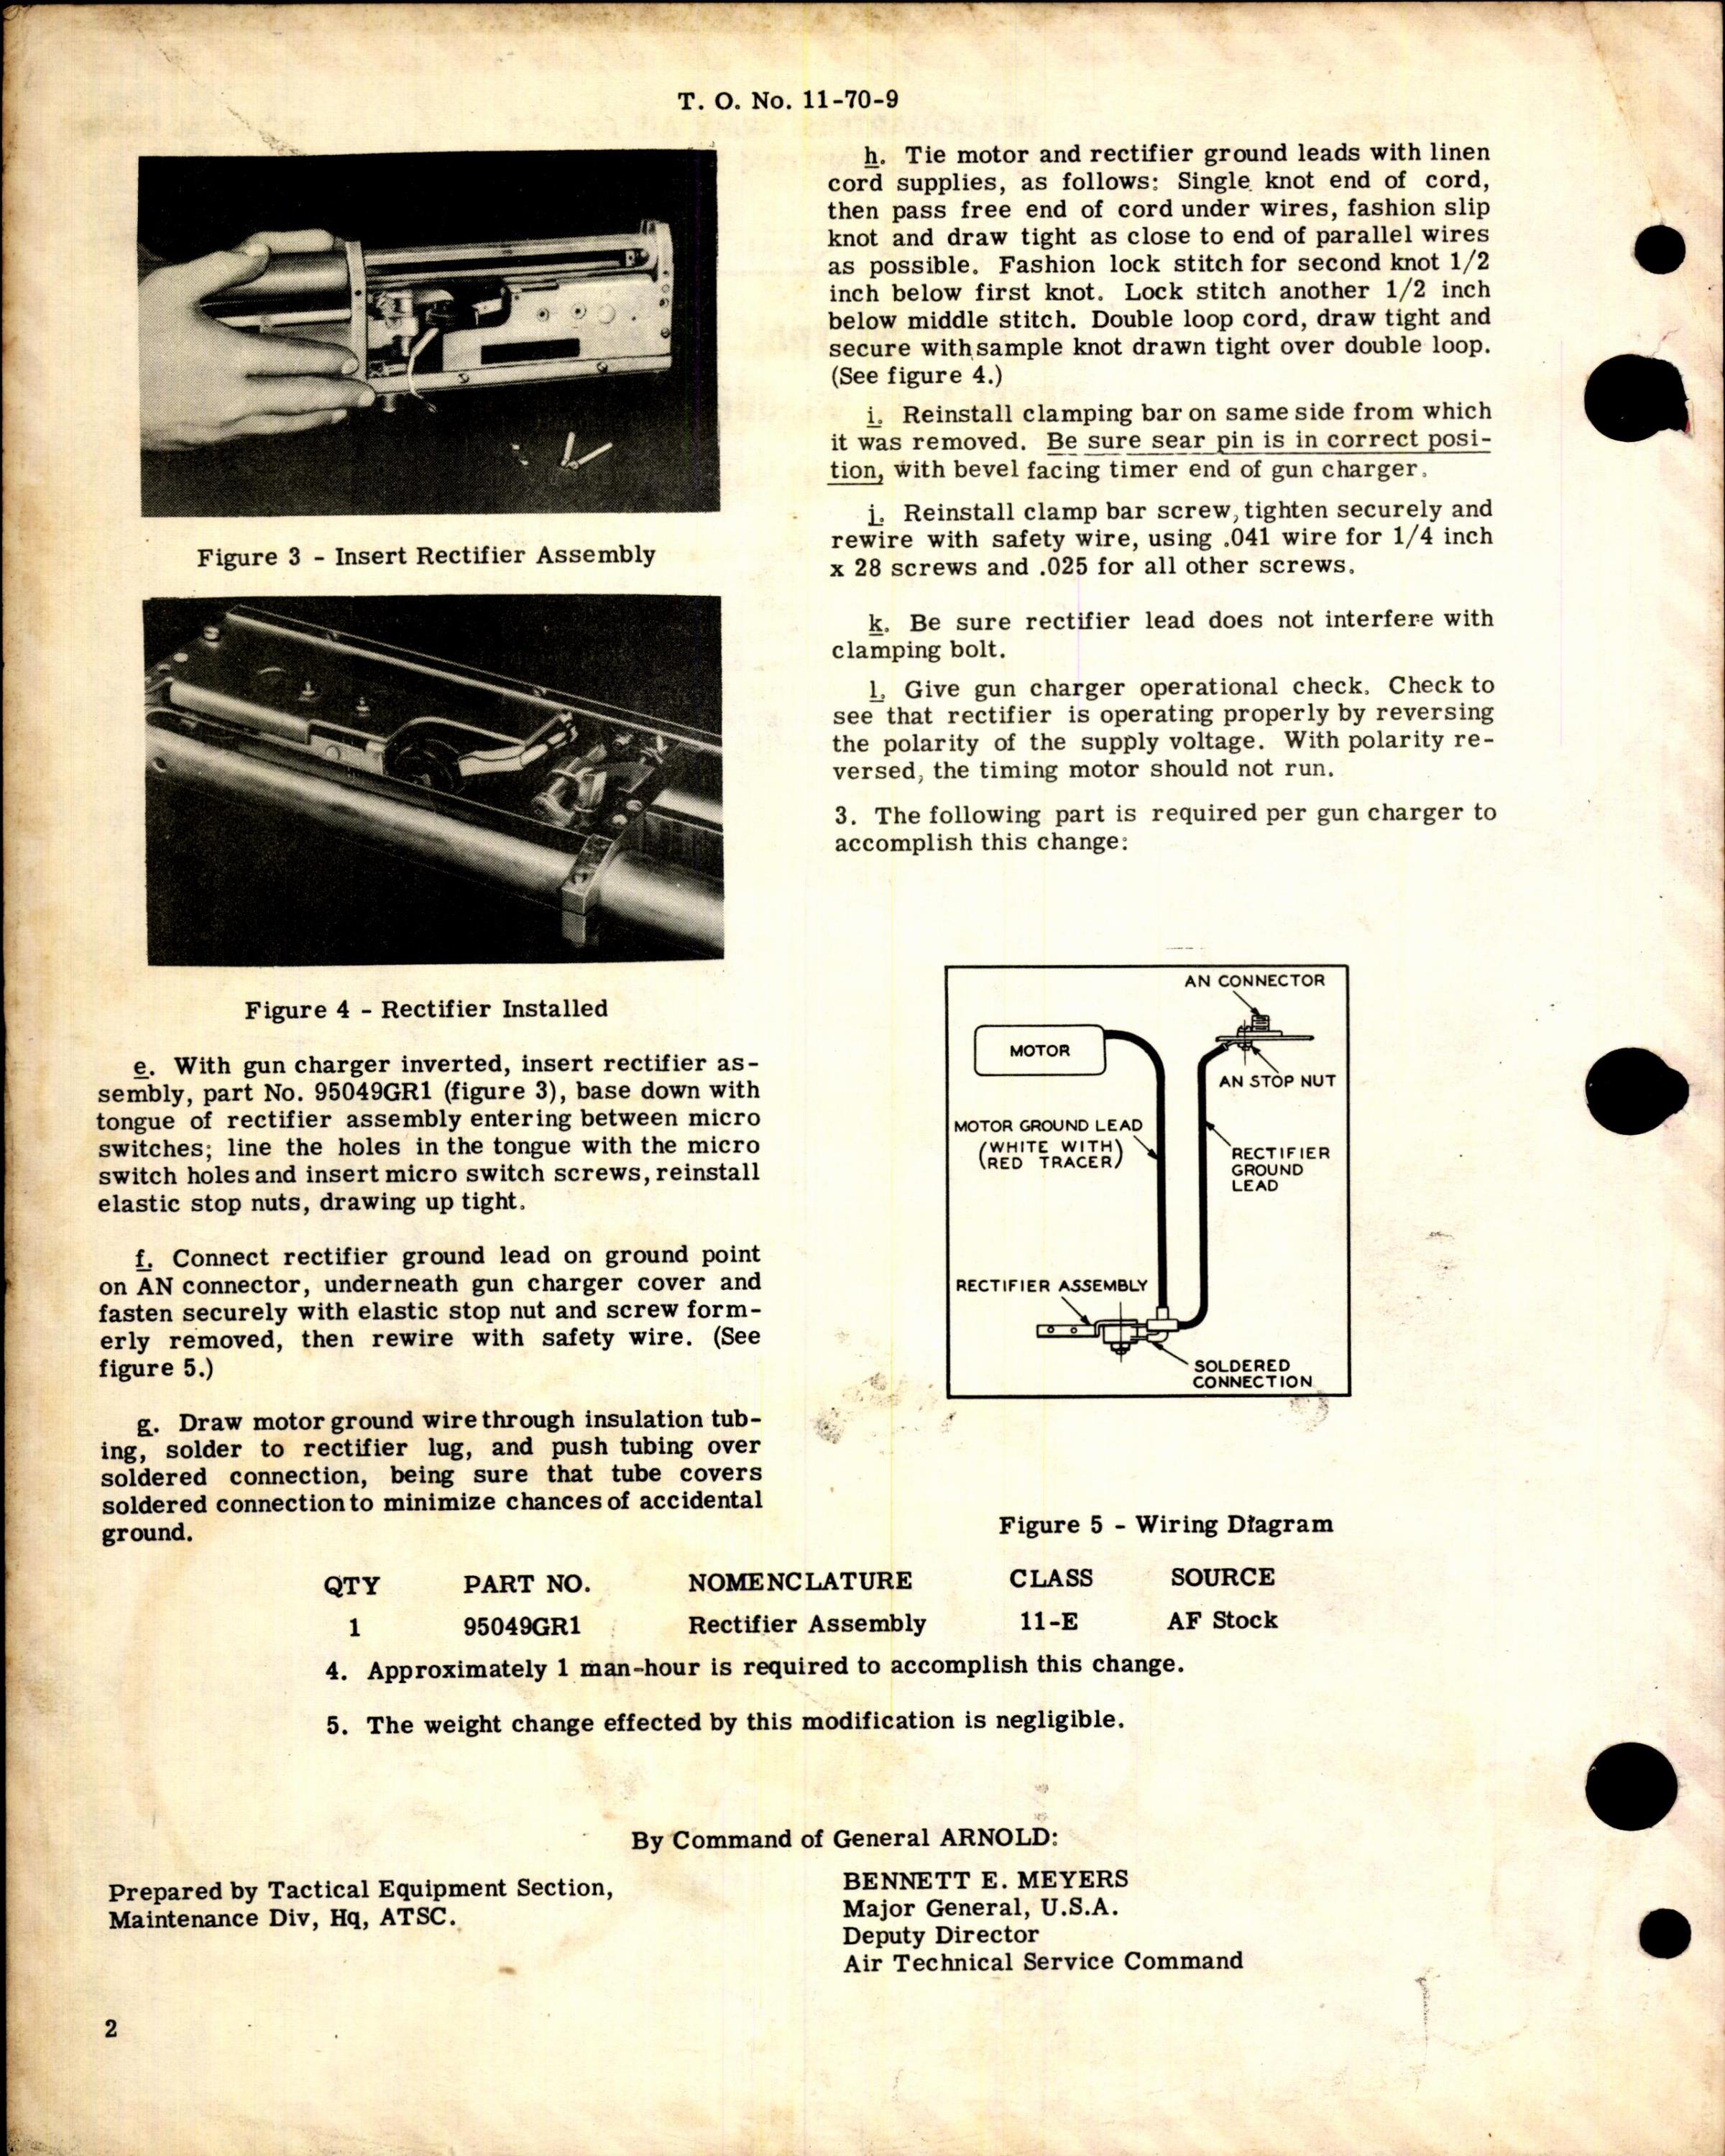 Sample page 2 from AirCorps Library document: Installation of Rectifiers on Gun Chargers